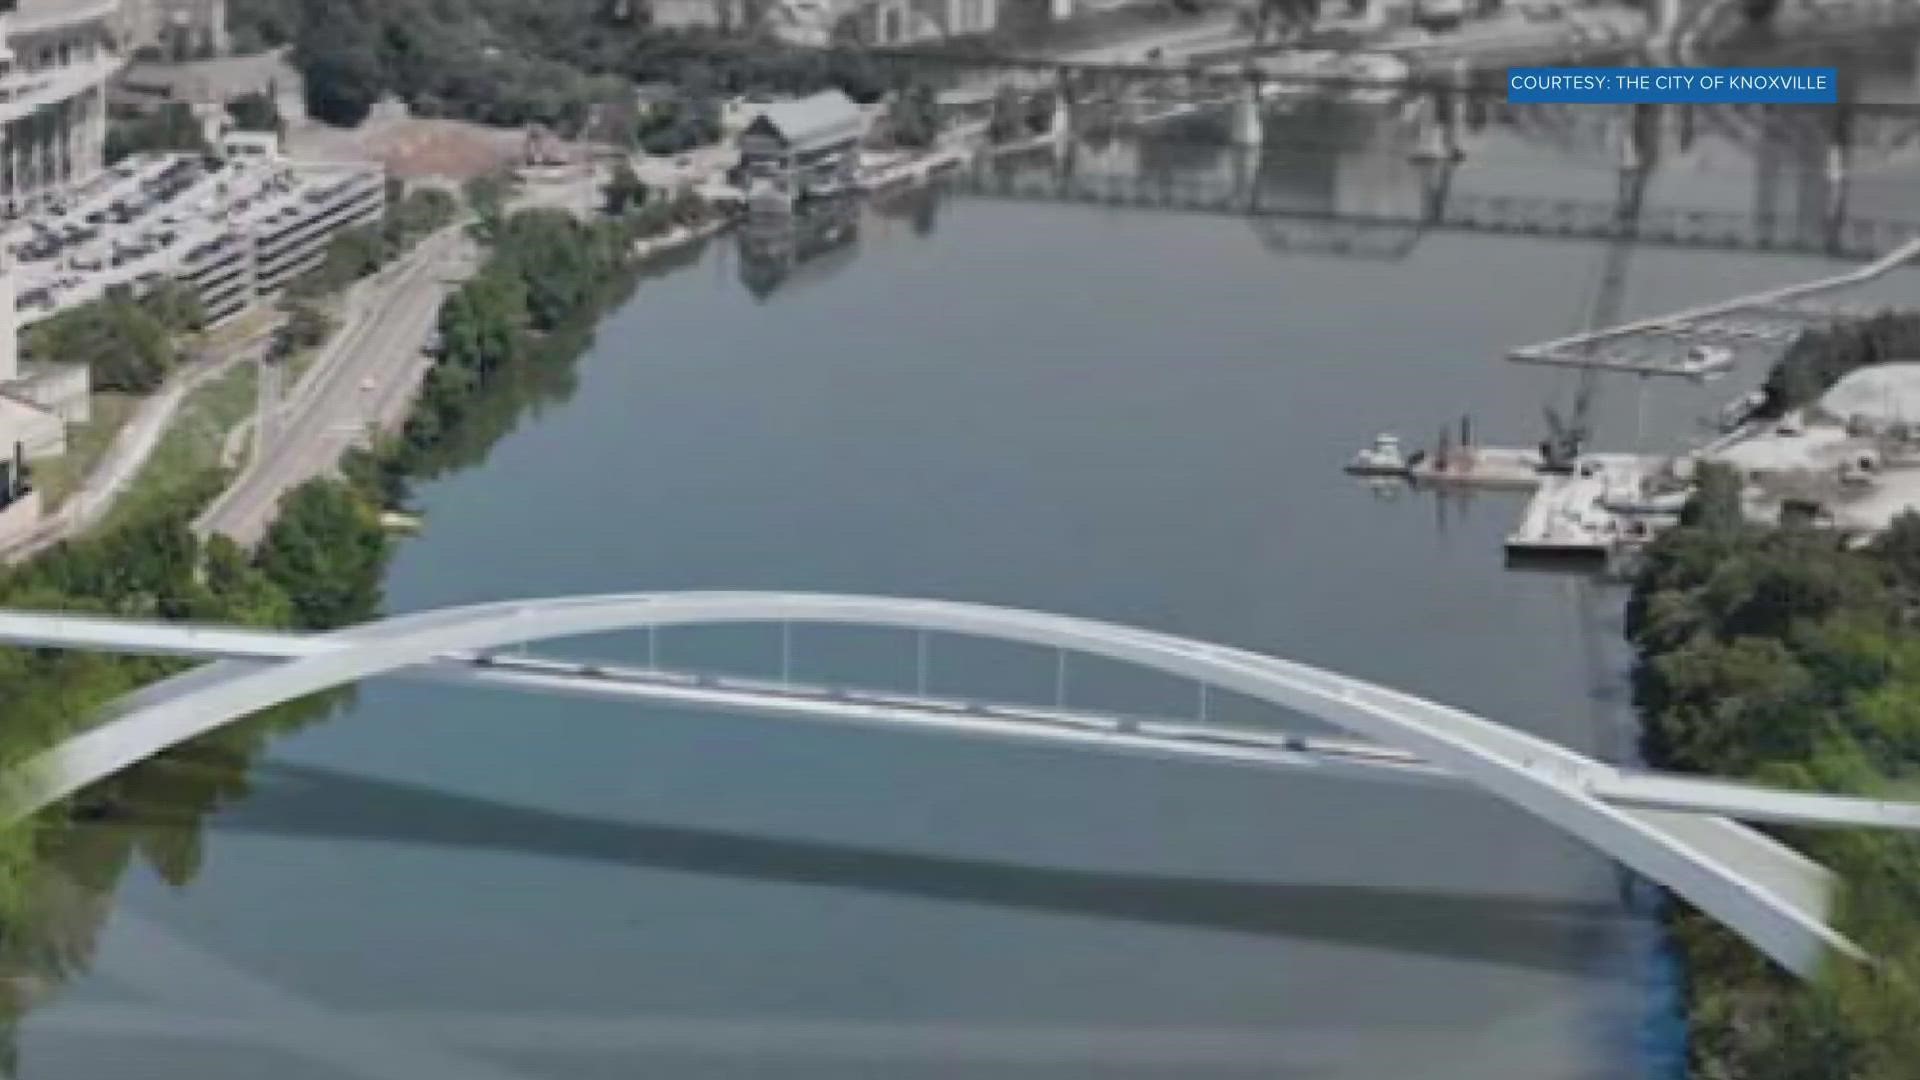 Knoxville City Council will vote on a grant to help build a new bridge for walkers and bikers across the Tennessee River.